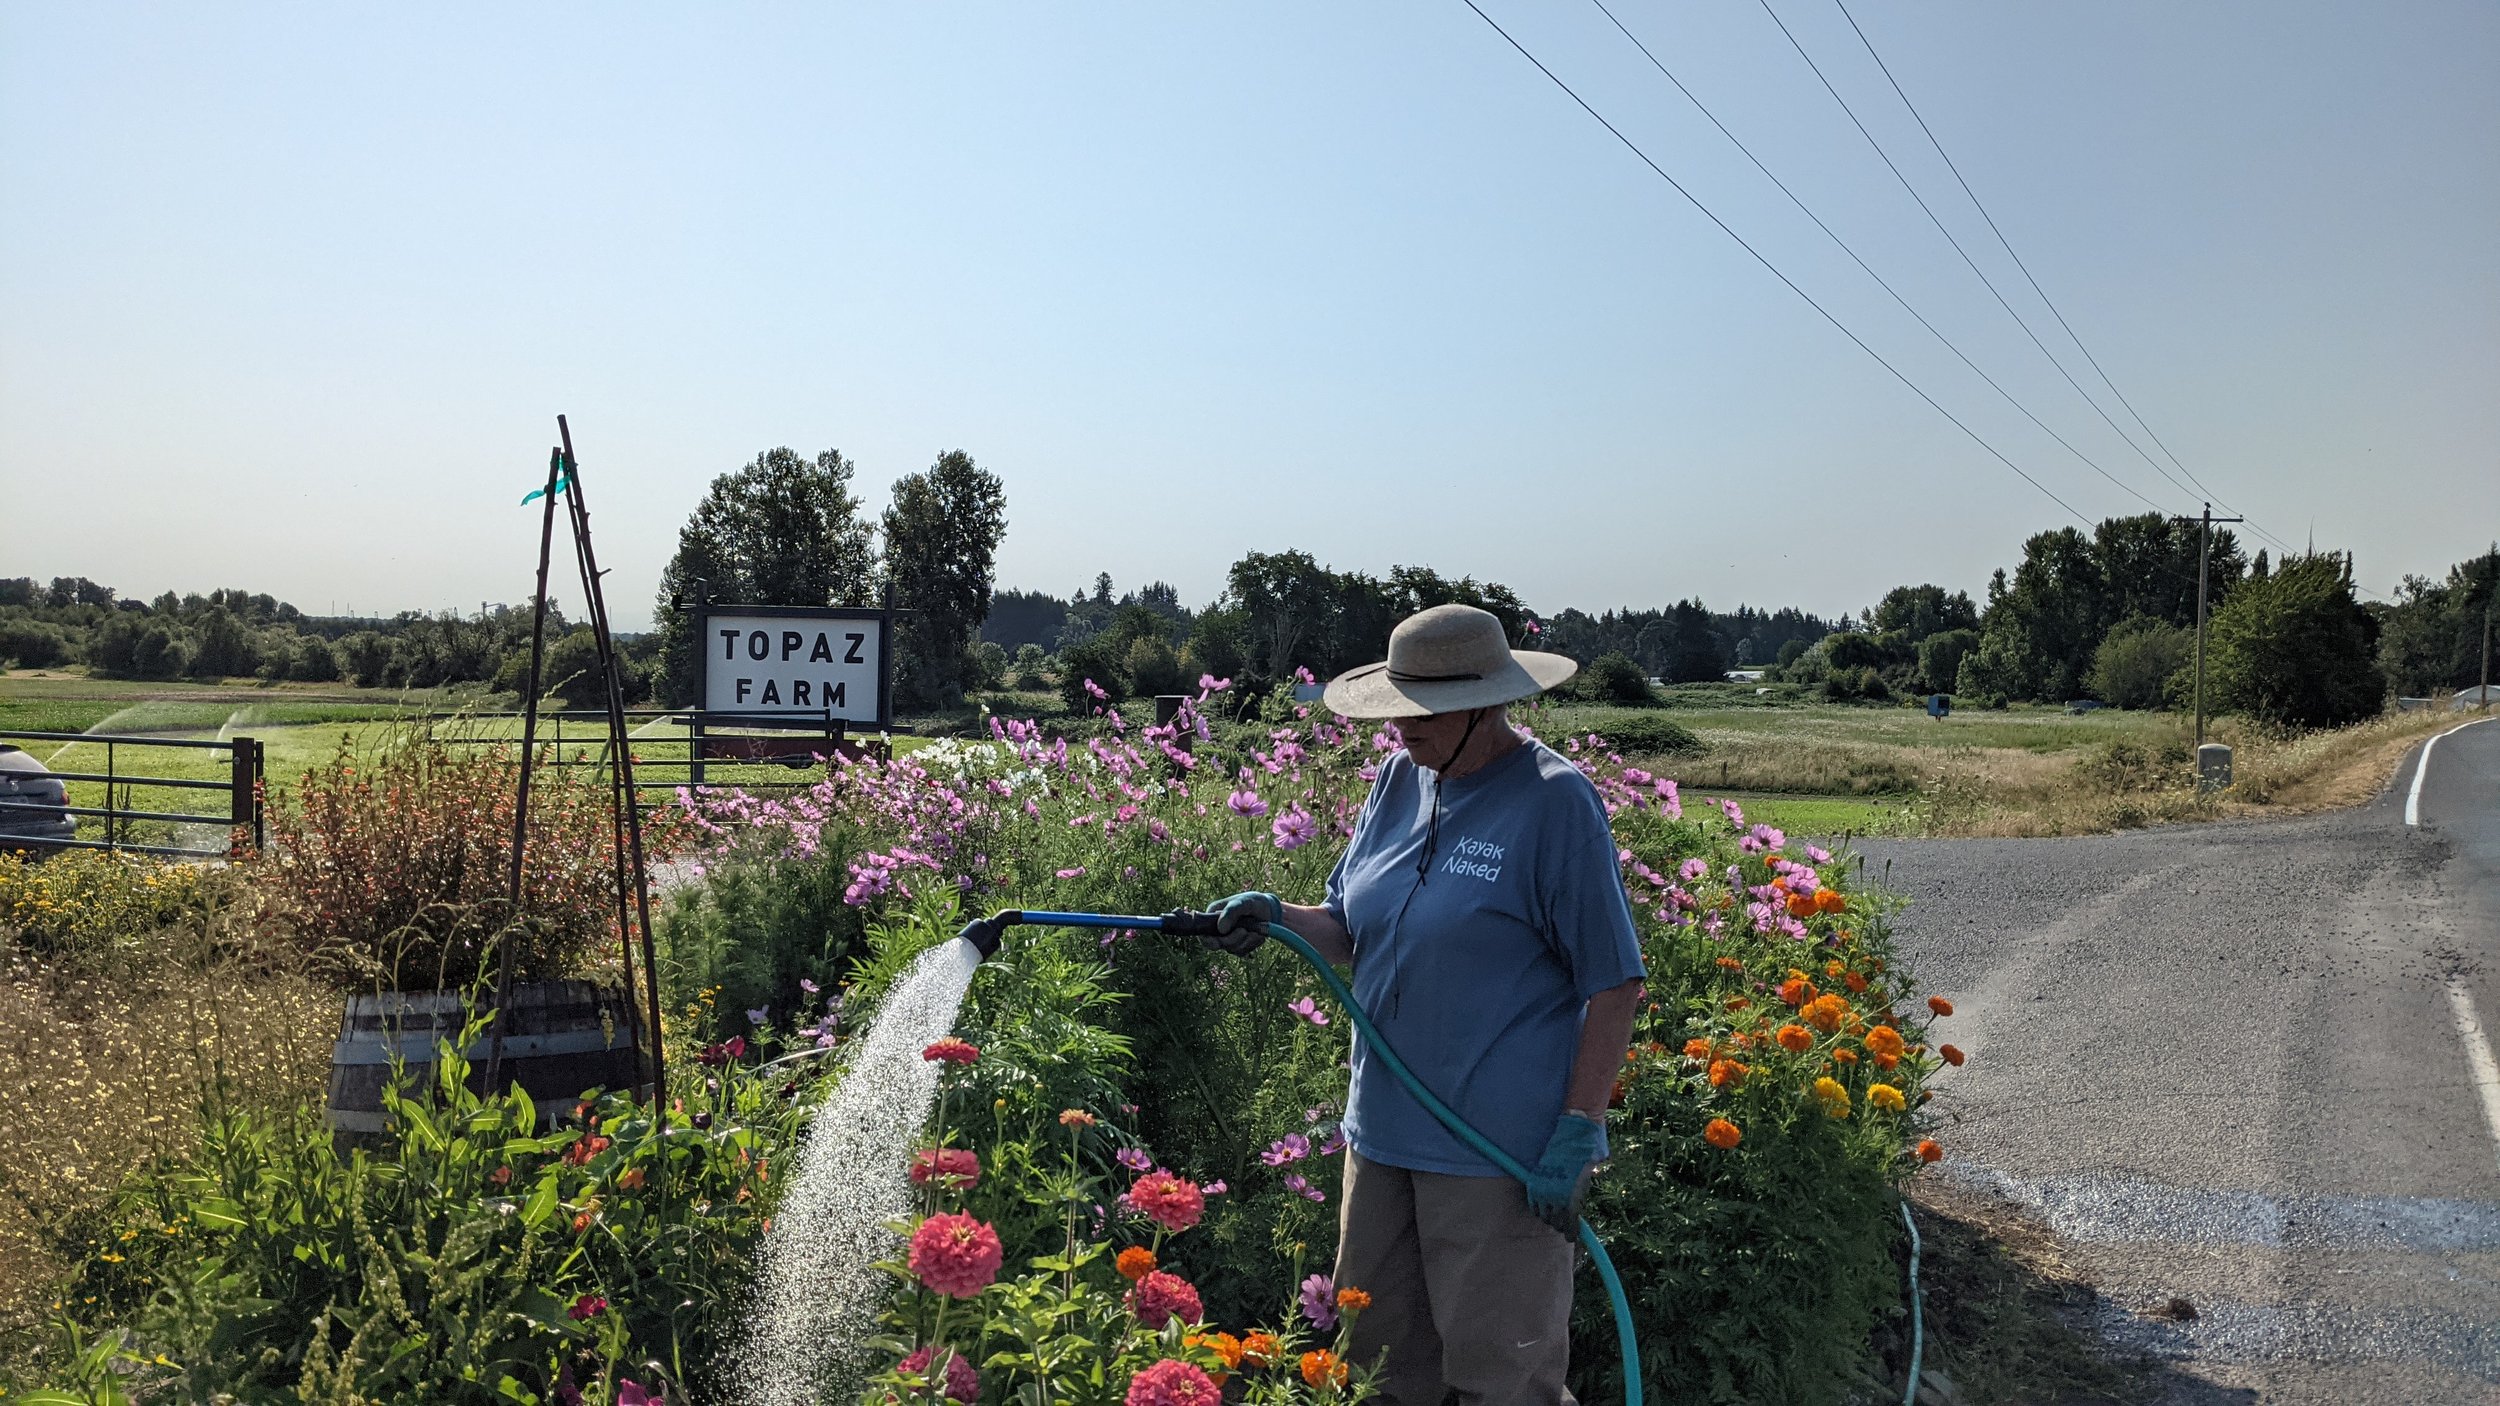  Our friend and neighbor, Joann, came by everyday to water our flowers at the farm entrance, and around the buildings. We have the most generous friends and neighbors. They helped us in so many ways this season. 